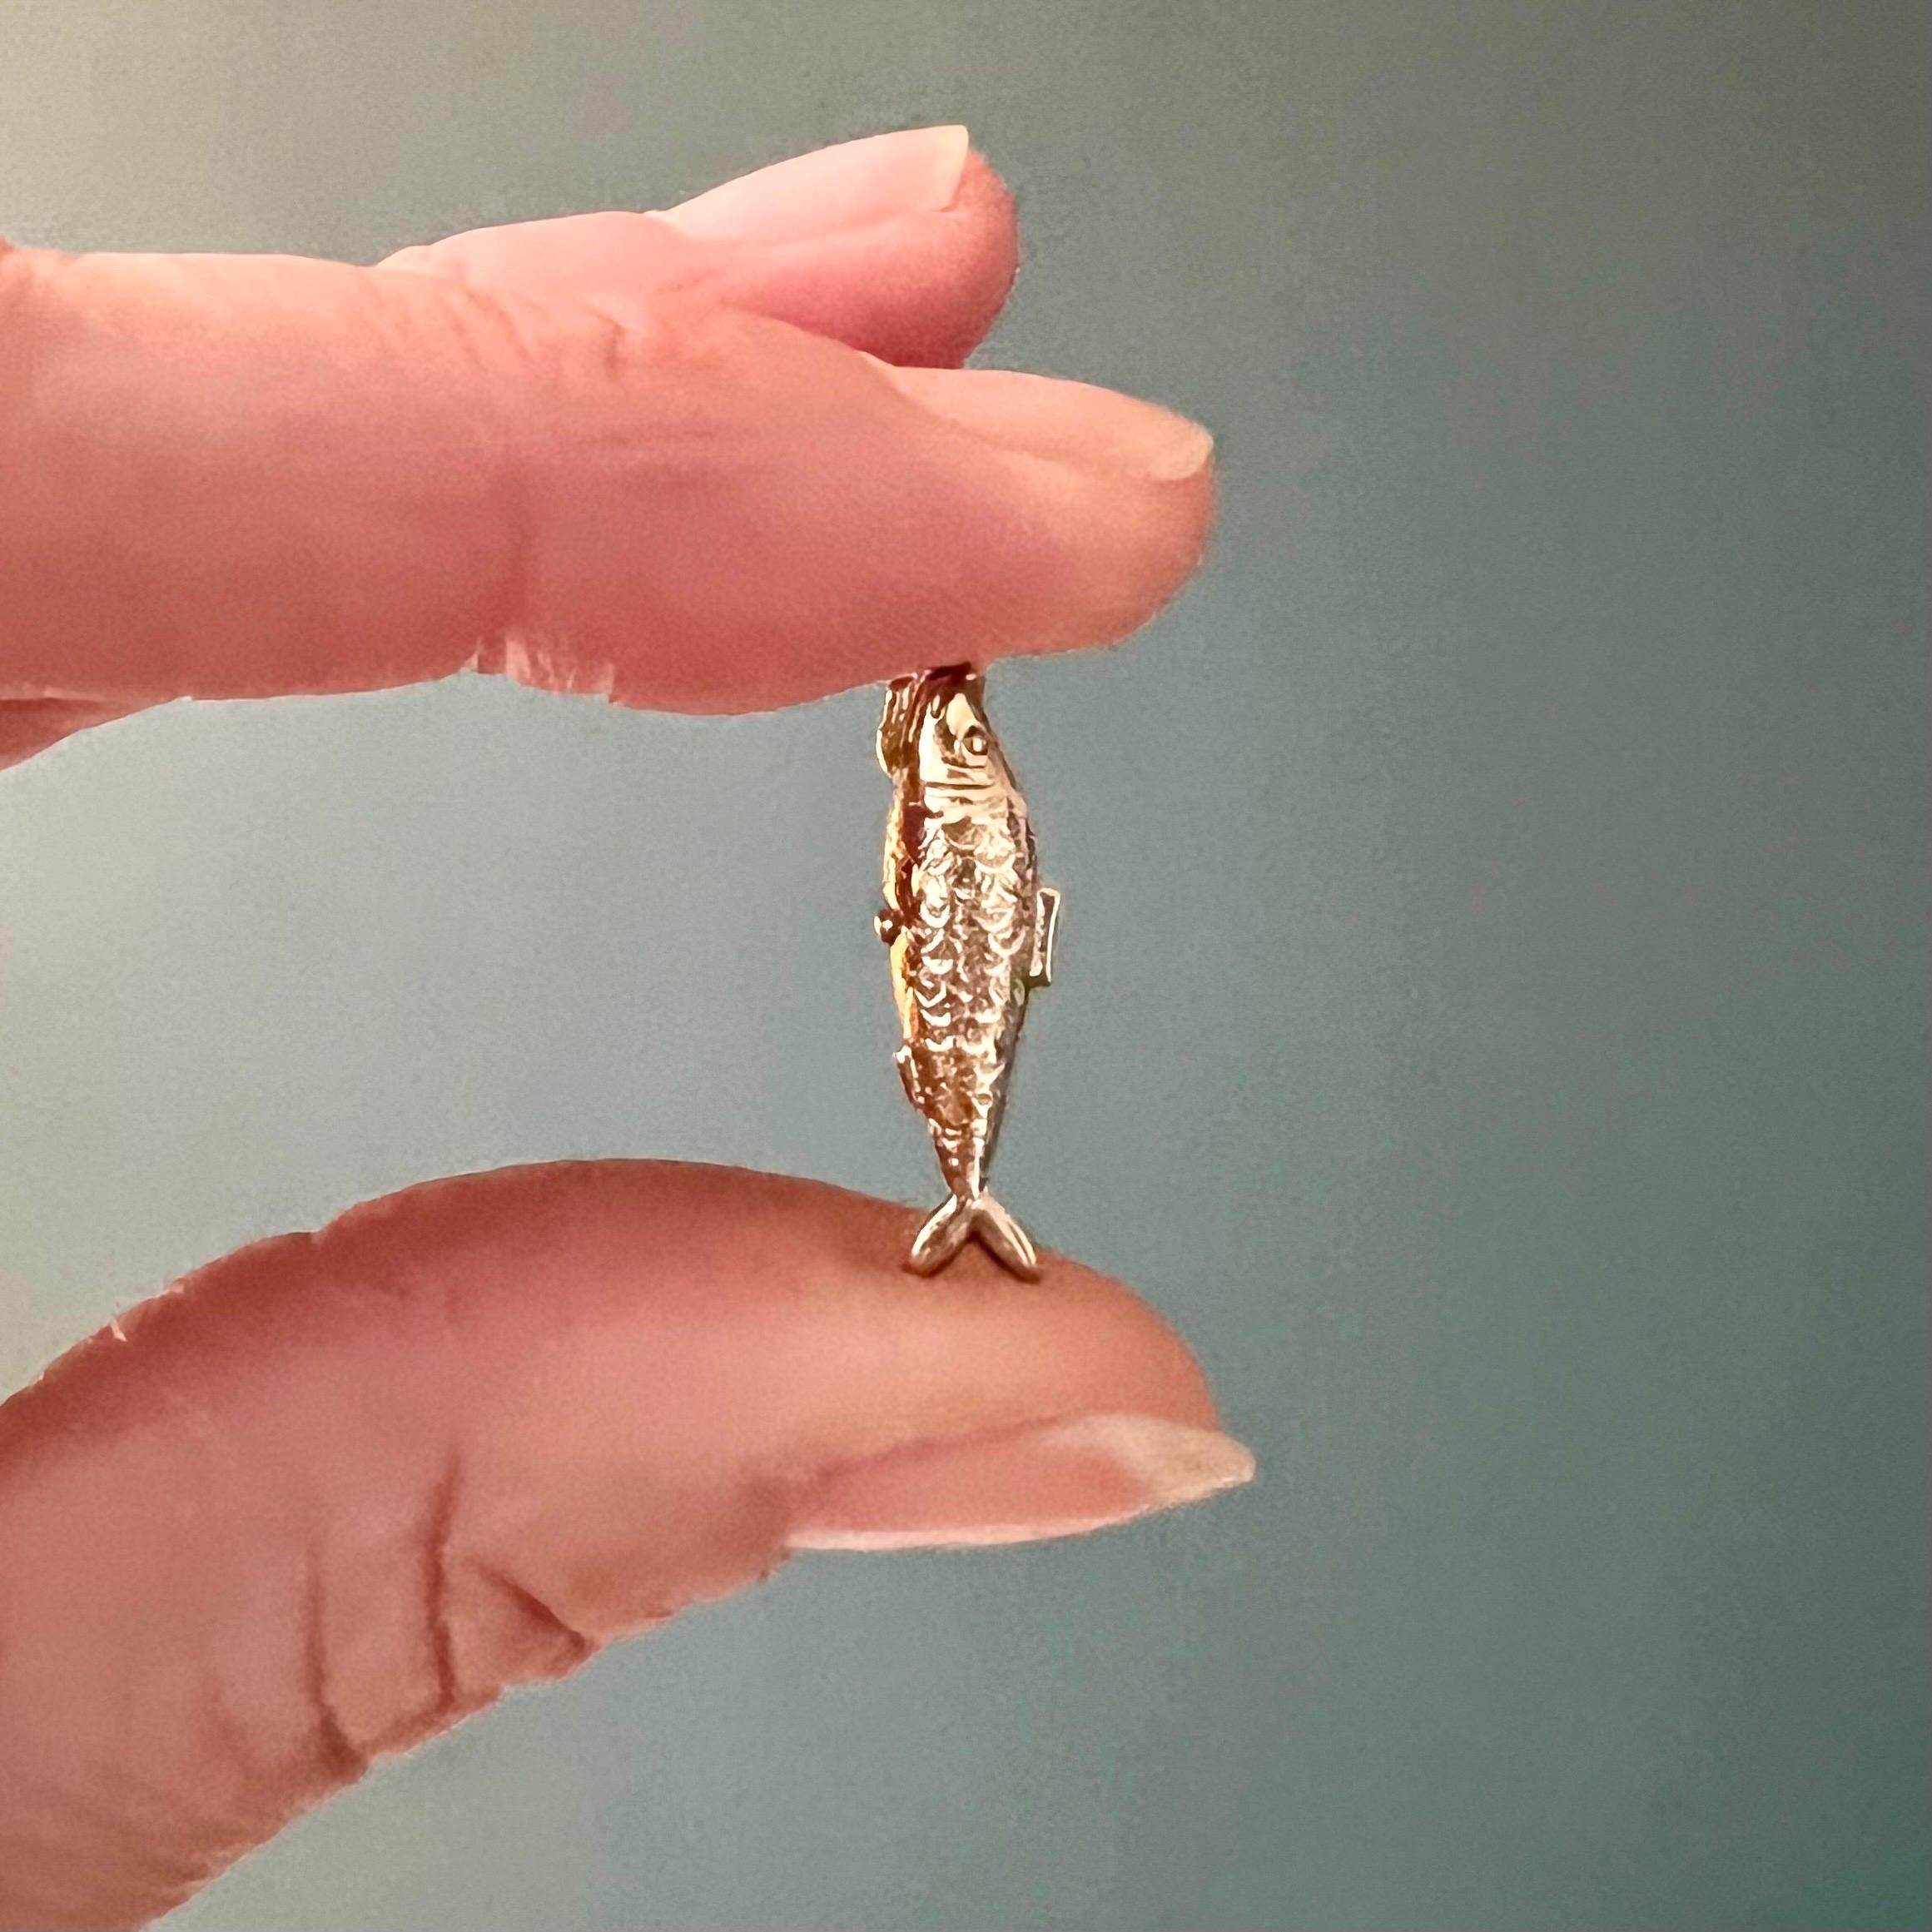 This is a 9 karat gold vintage fish charm pendant. The fish charm is beautifully detailed and has nice engravings with scales and fins on the body.

Charms are great to collect as wearable memories, it has a symbolic and often a sentimental value.